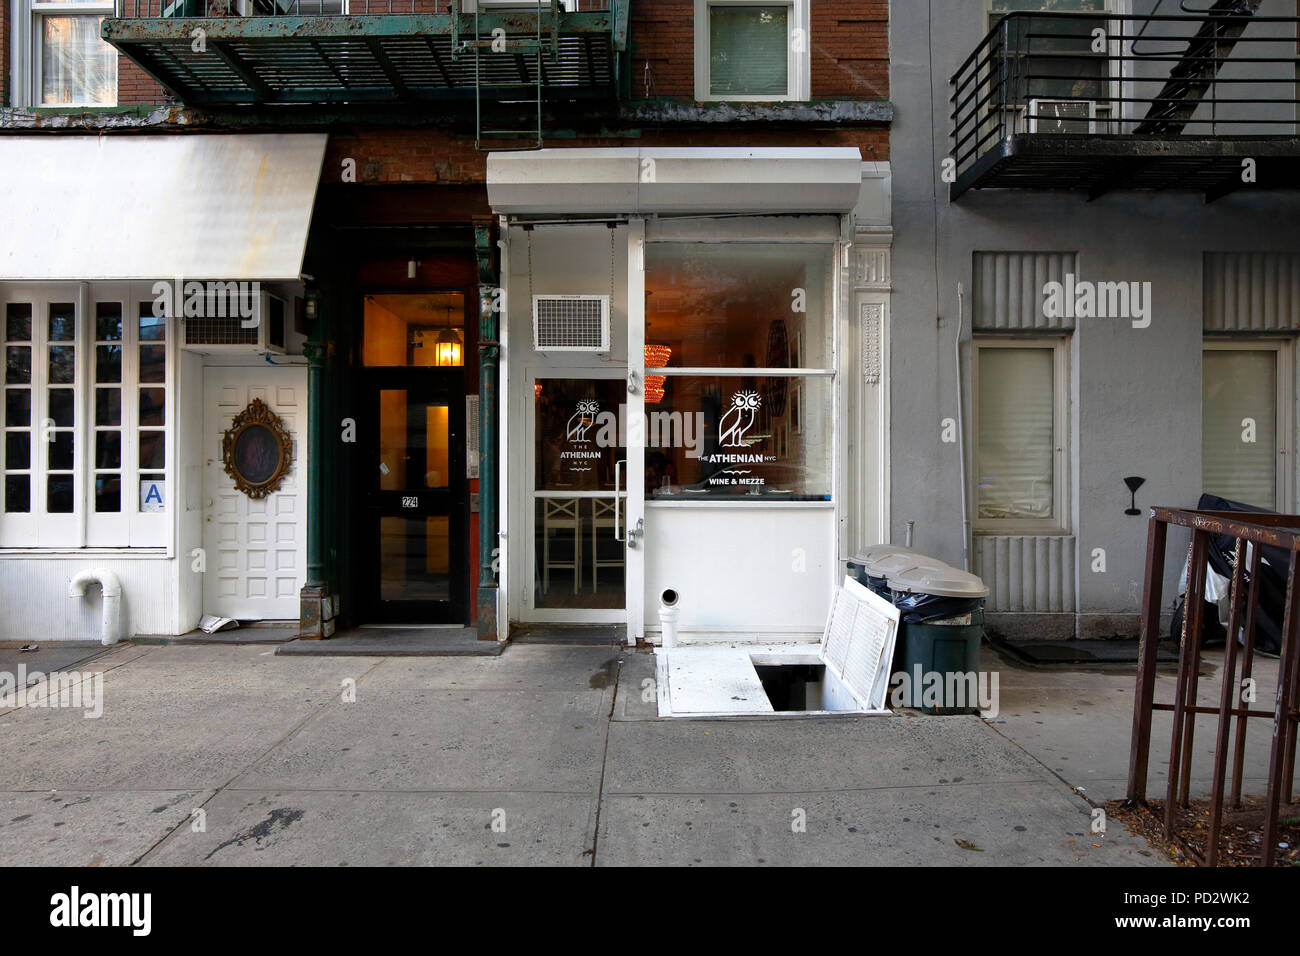 The Athenian, 224 E 10th St, New York, NY. exterior storefront of a wine bar in the East Village neighborhood of Manhattan. Stock Photo